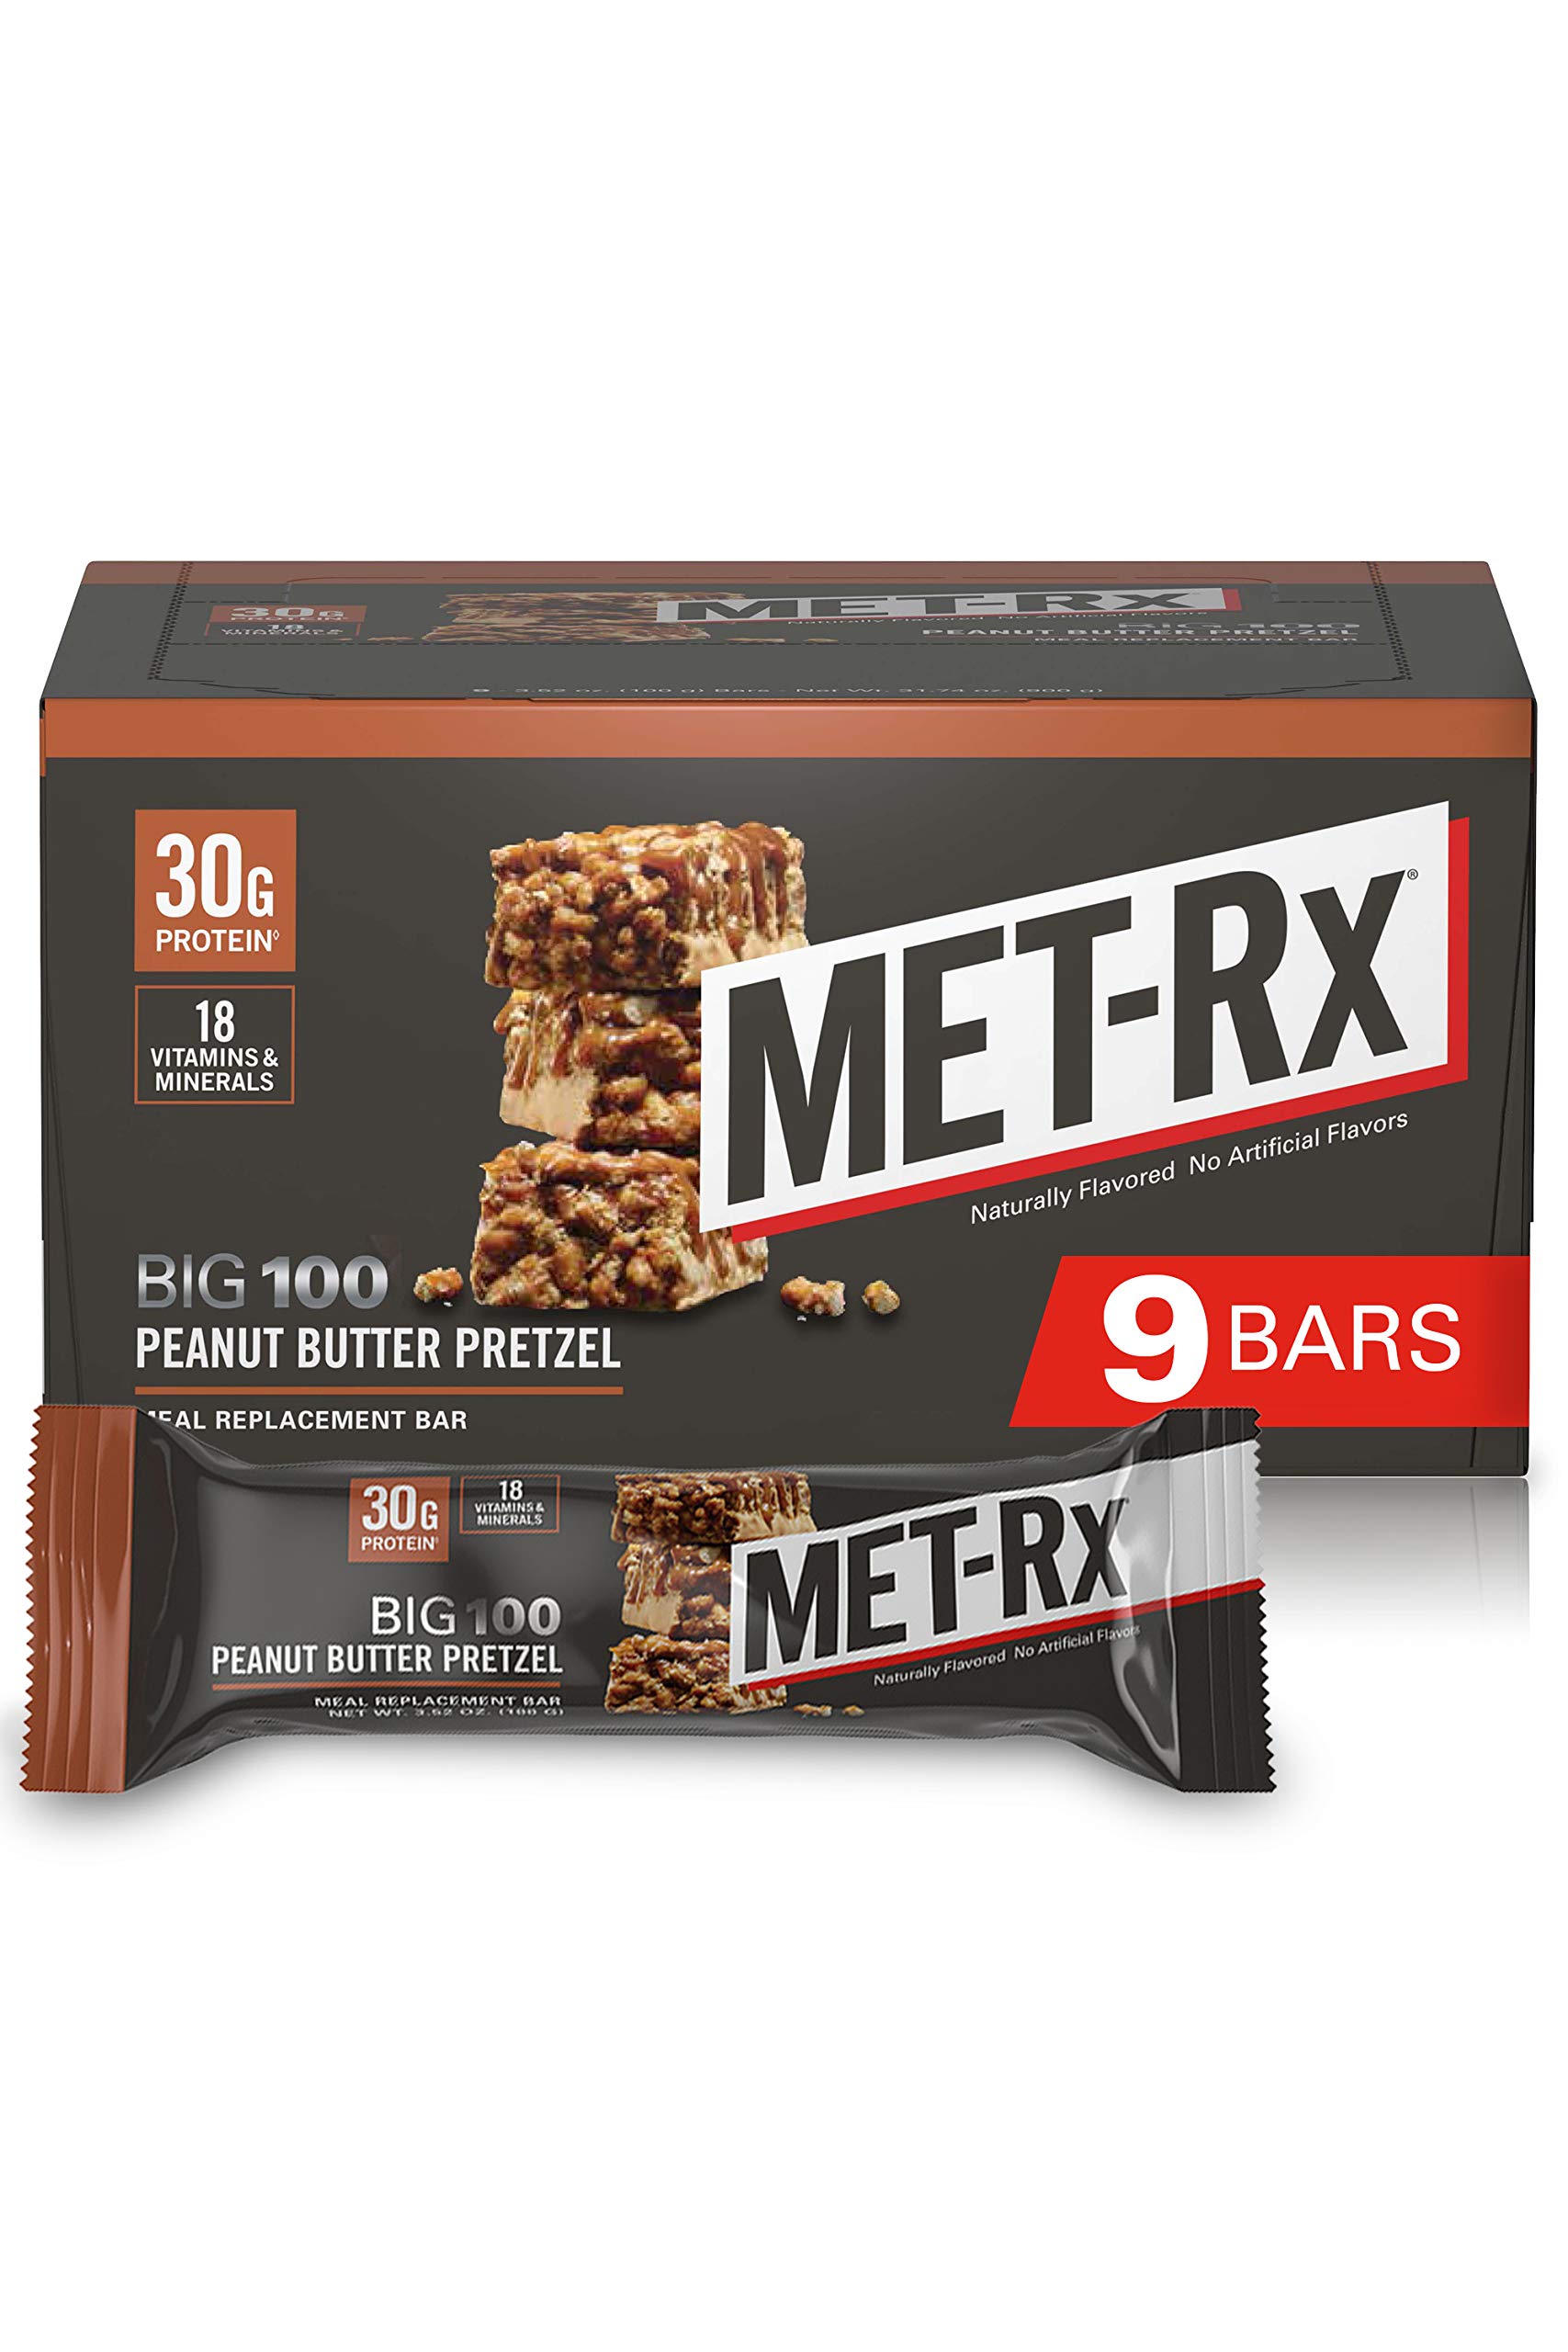 MET-Rx Big 100 Colossal Protein Bars, Great as Healthy Meal Replacement, Snack, and Help Support Energy, Peanut Butter Pretzel, With Vitamin A, Vitamin C, and Zinc, 100 g, (Pack of 9)